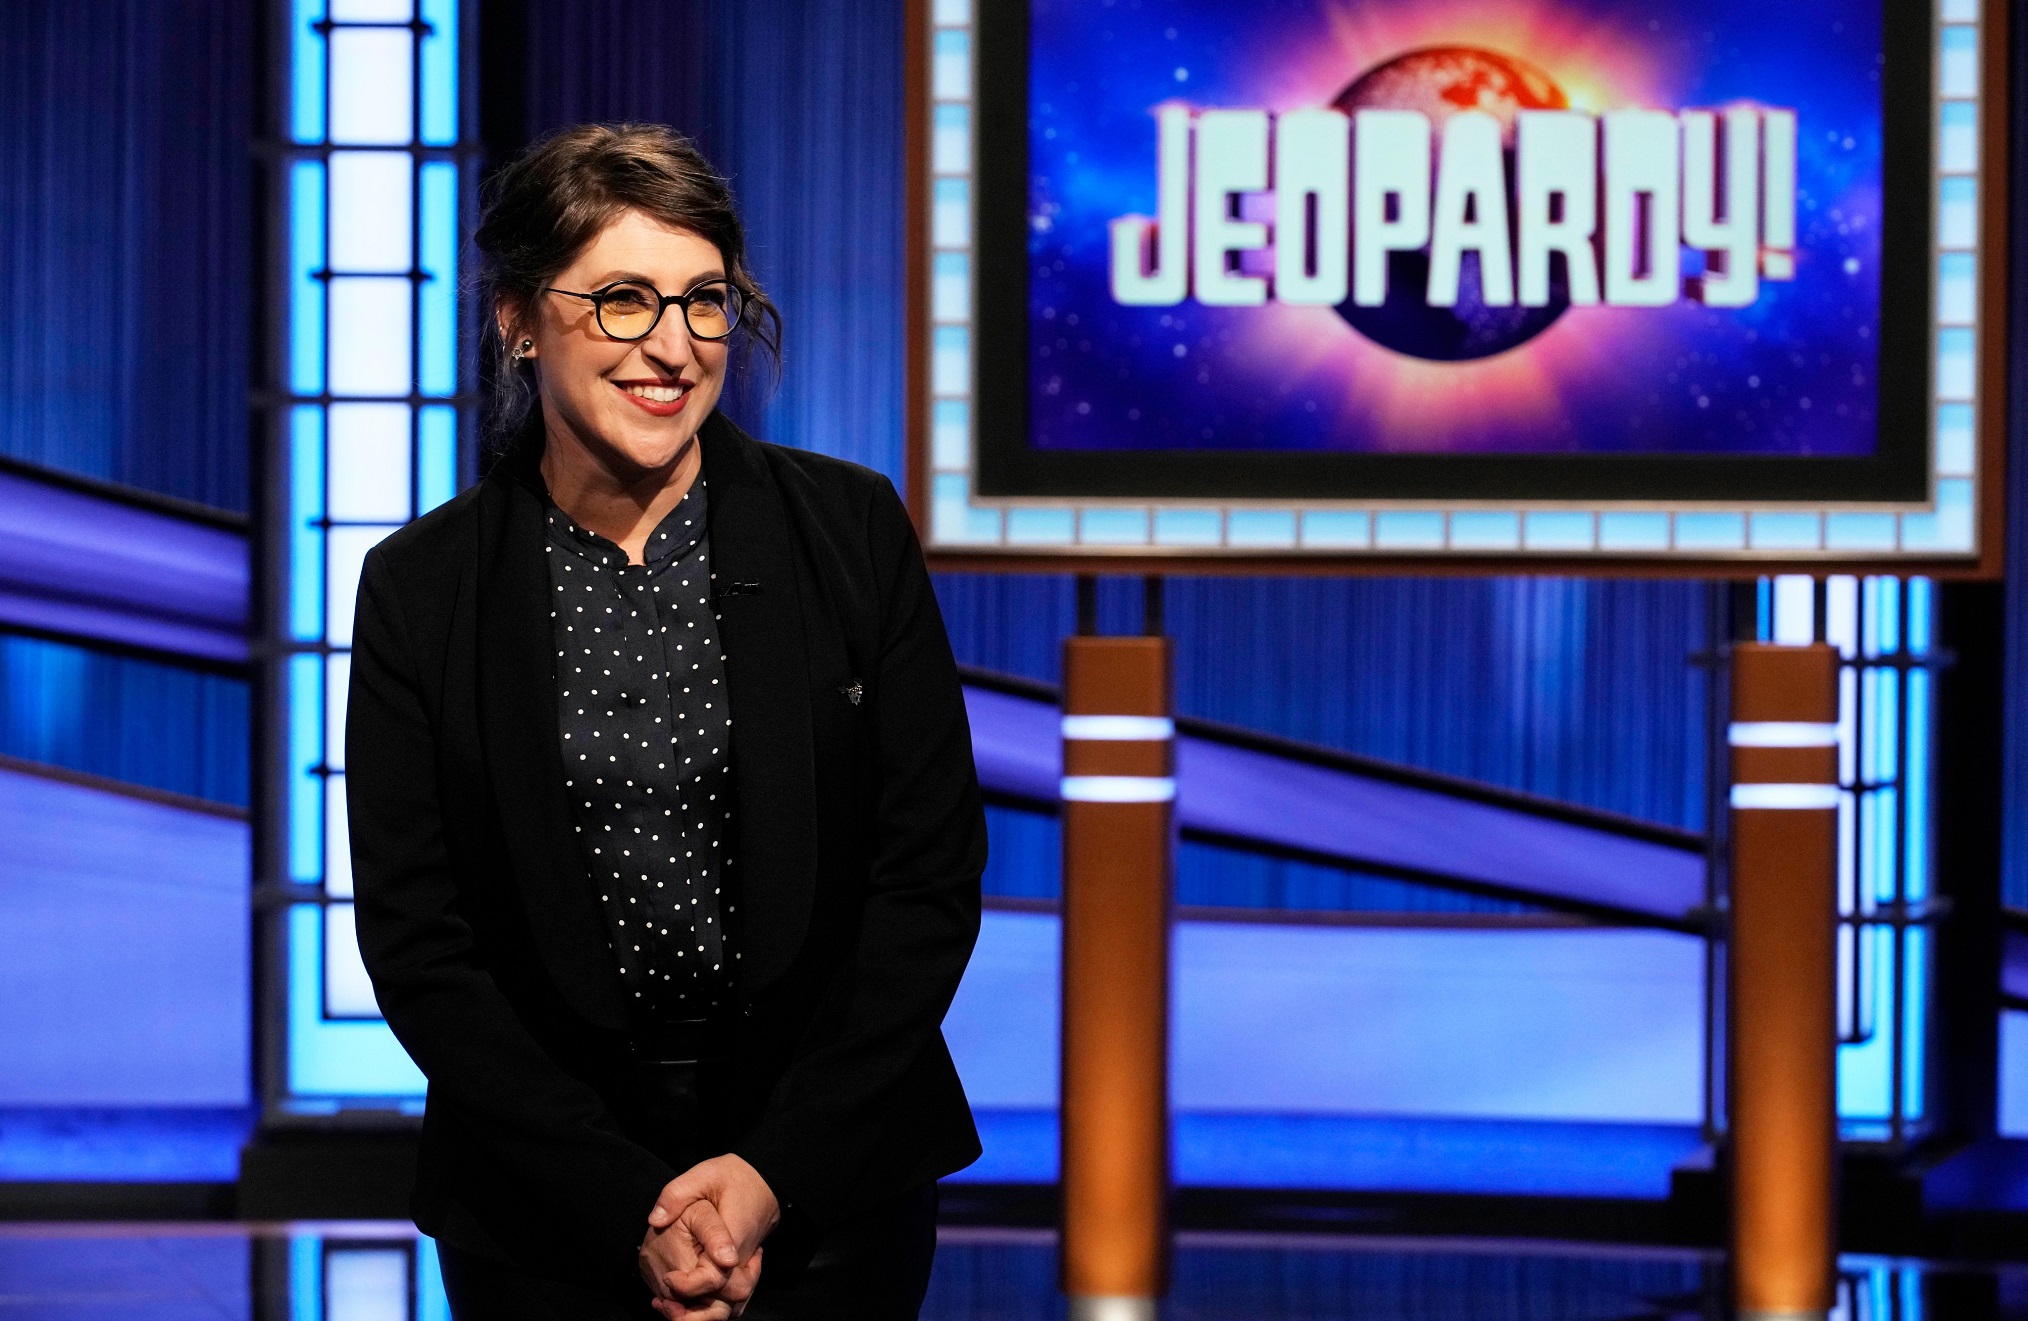 ‘Celebrity Jeopardy!’ Kicks Off With a Stunning LastMinute Victory